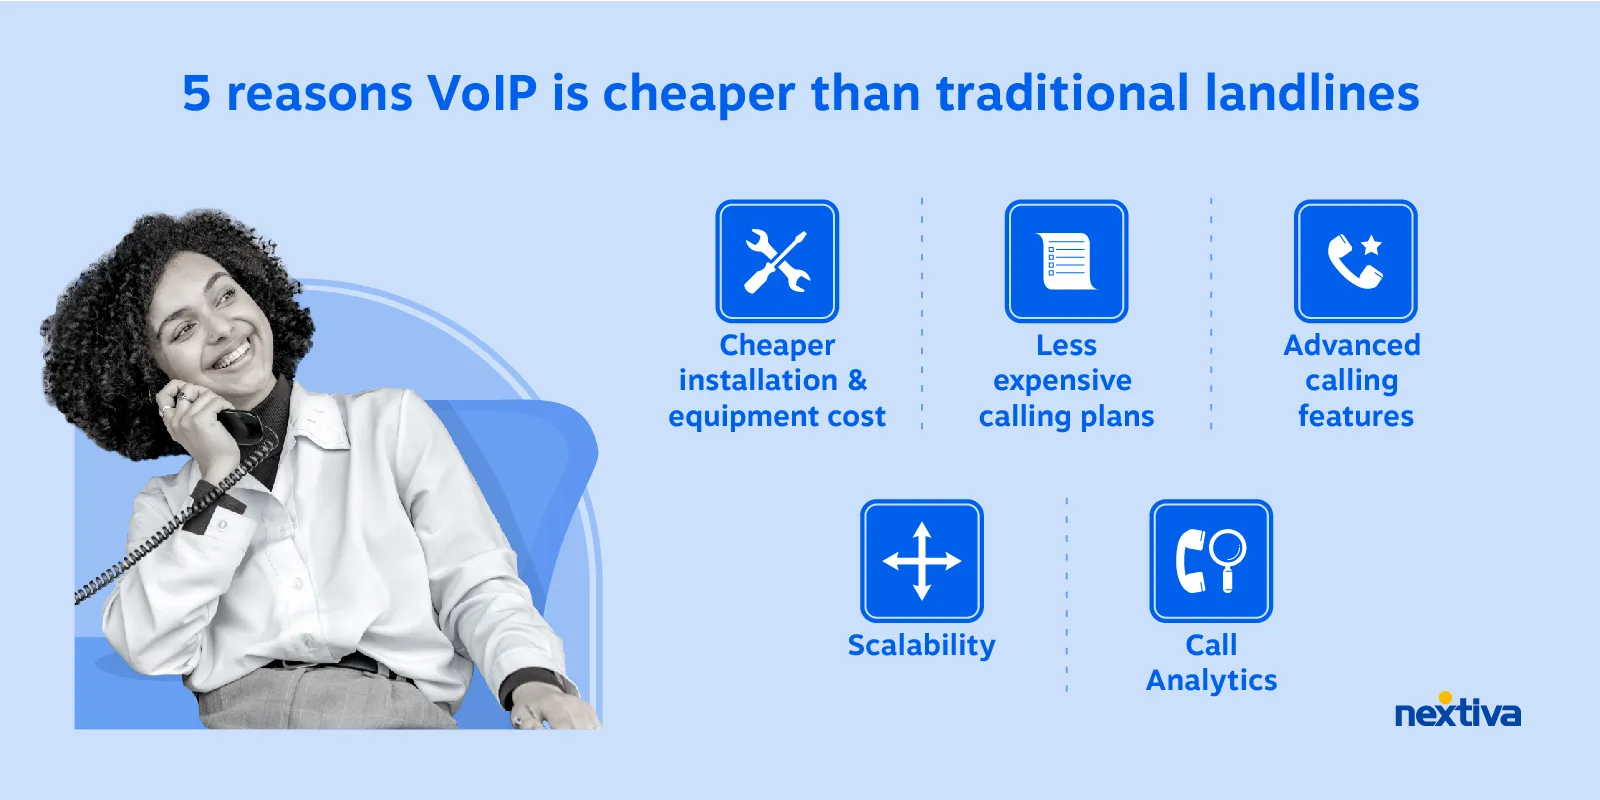 5 reasons VoIP is cheaper than traditional landlines